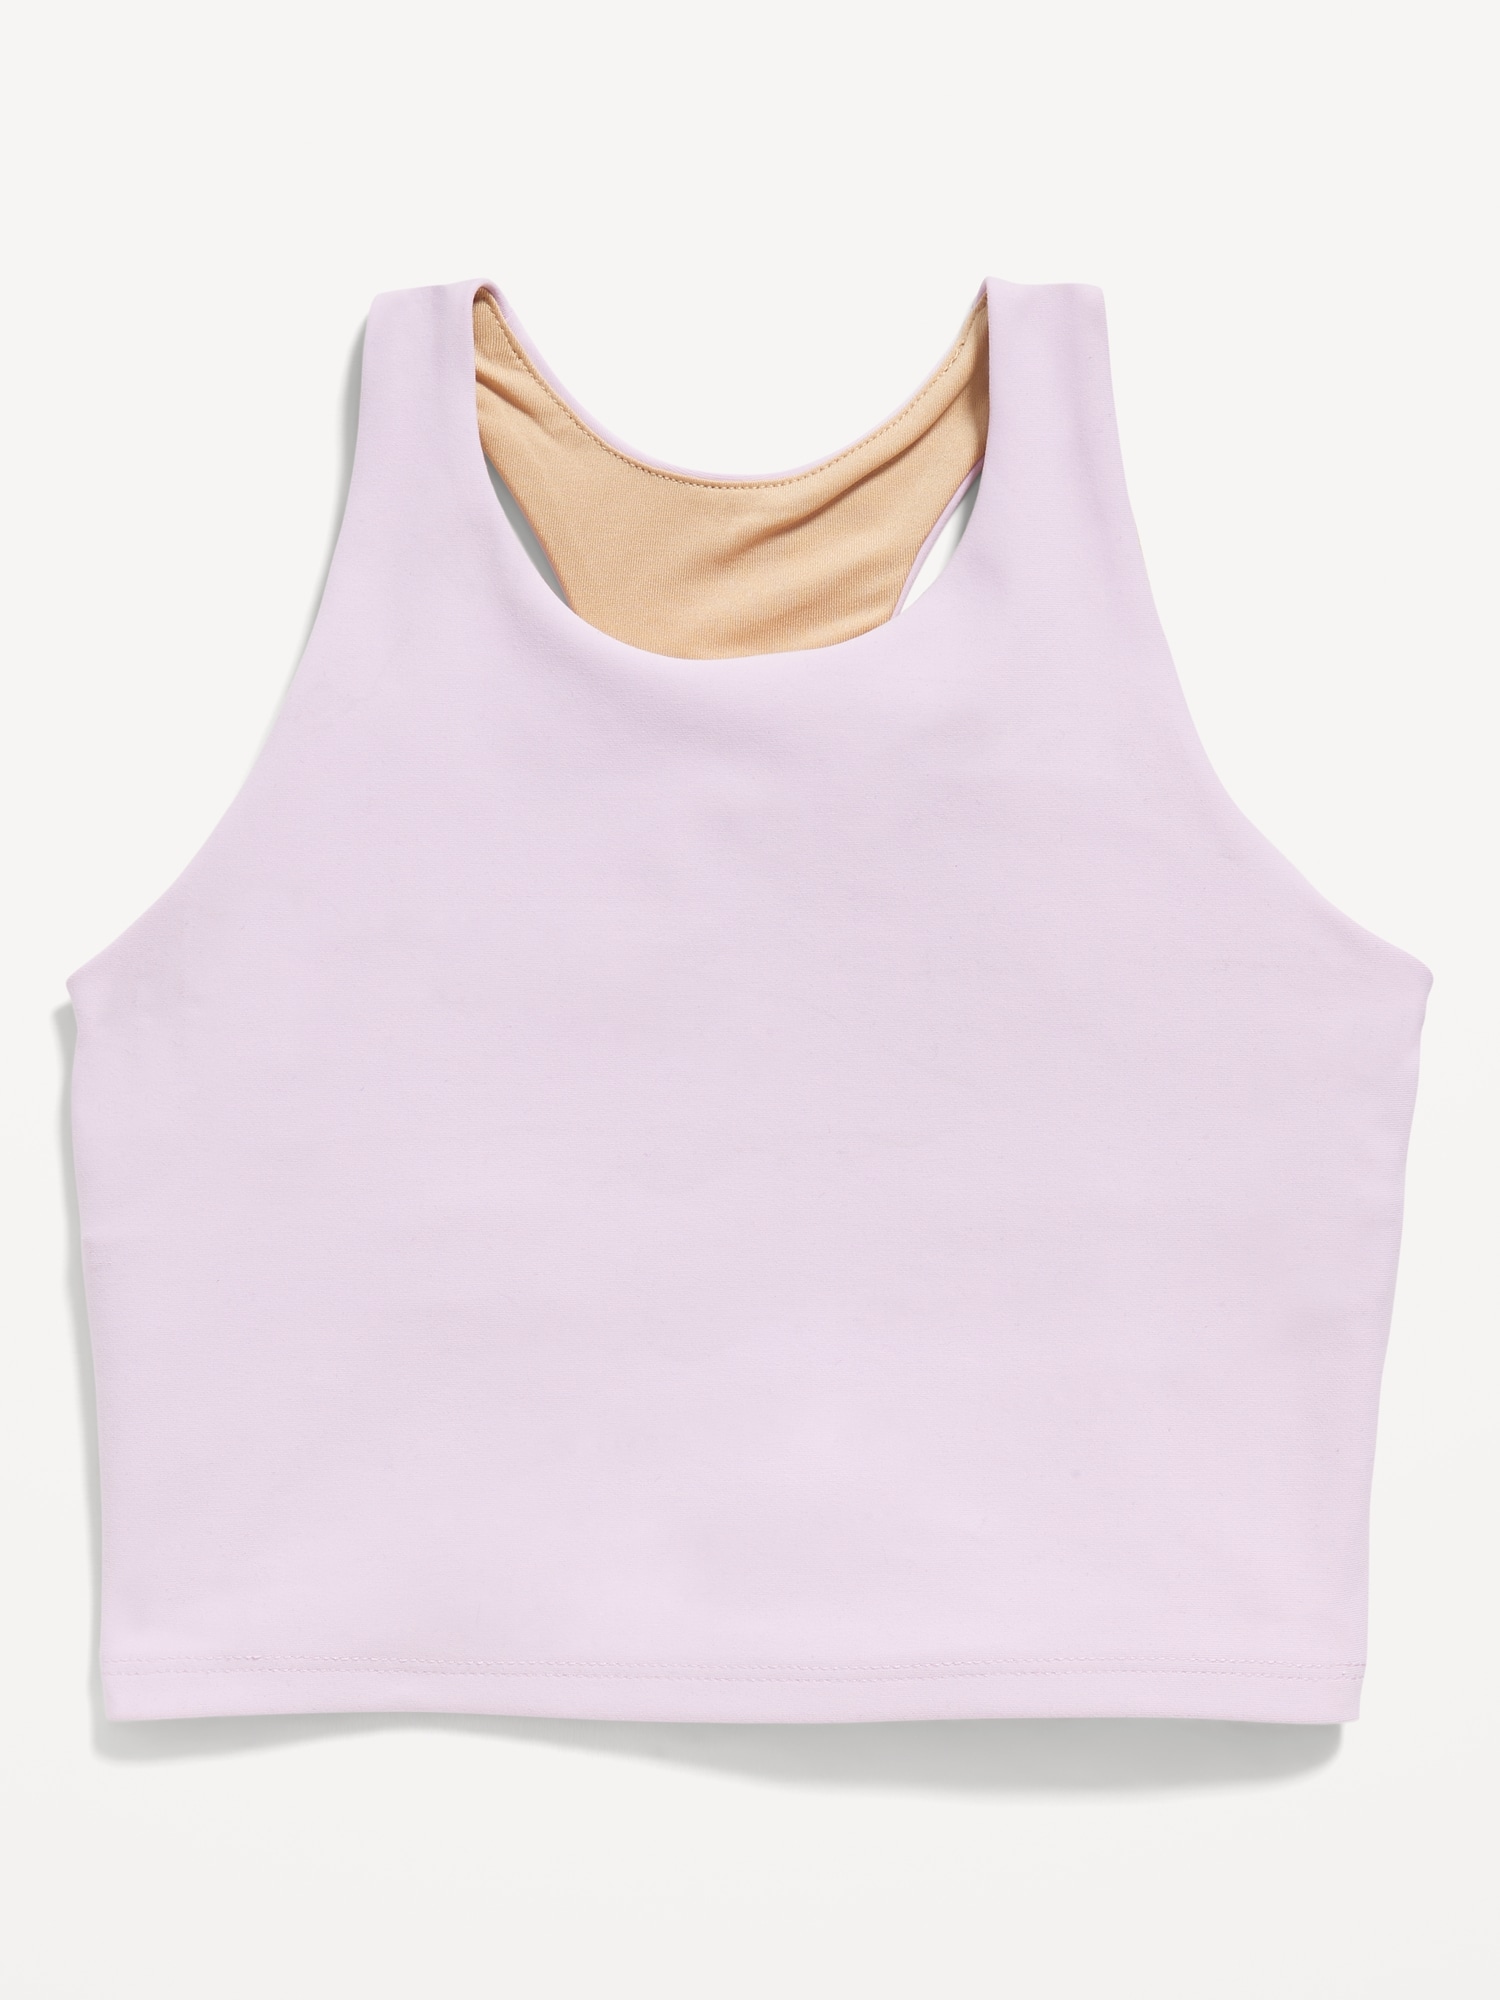 Sports Bras with Wide Band